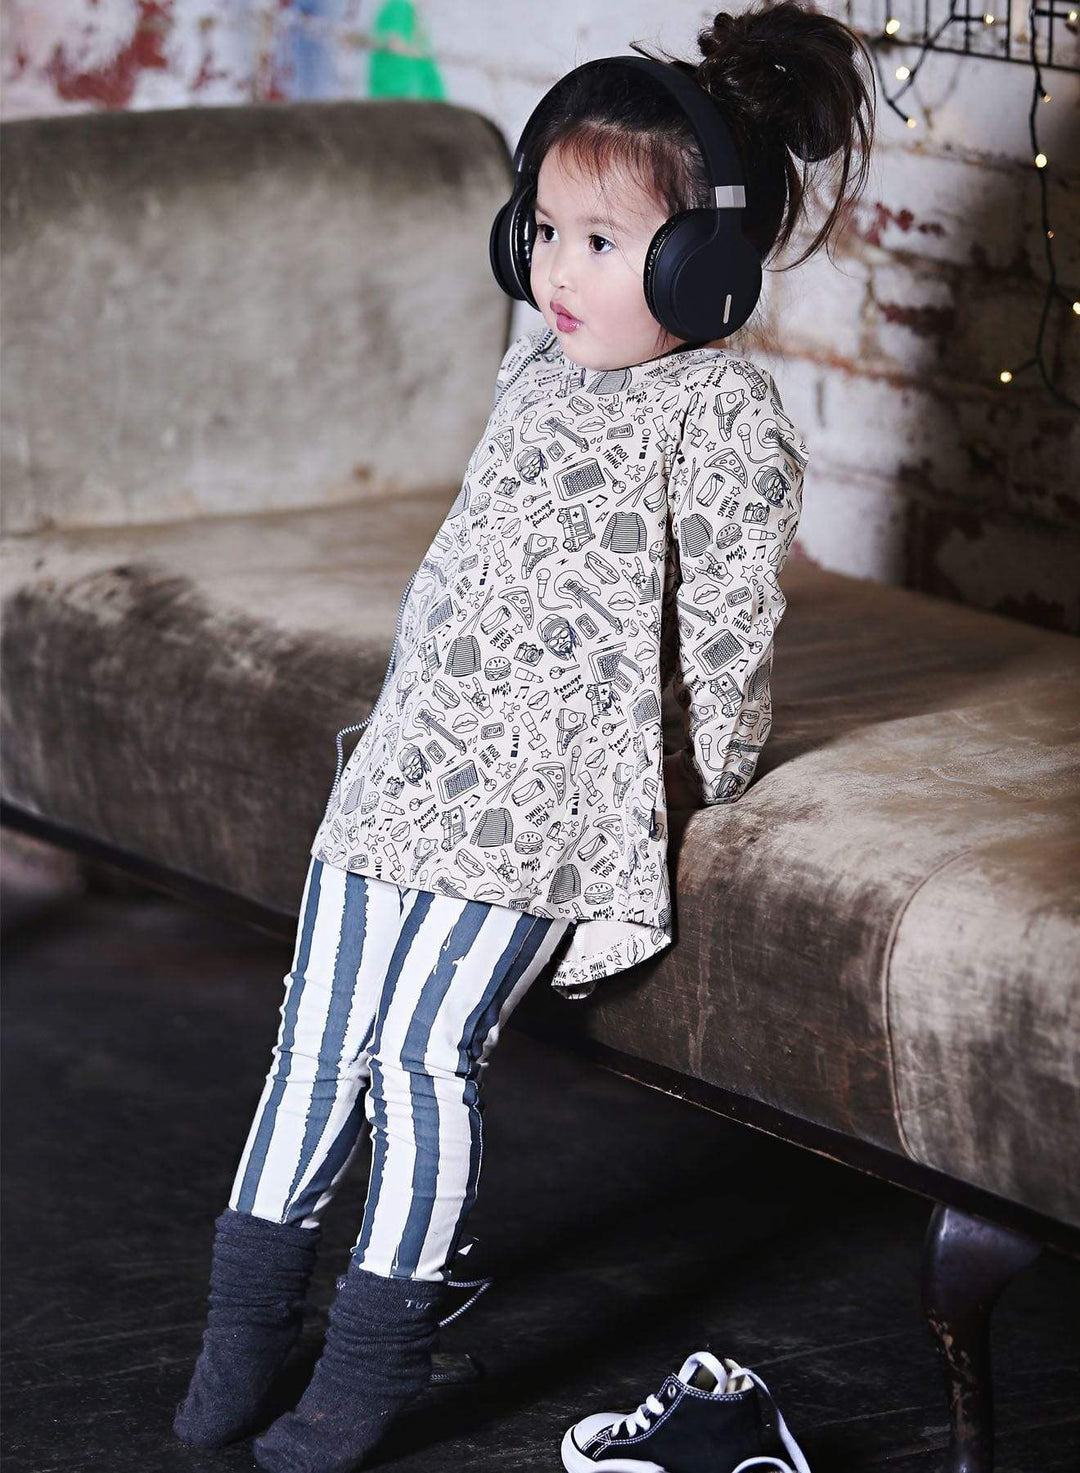 A little girl wearing Anarkid Organic Cotton Slate Grunge Stripe Leggings - LUCKY LASTS - 0-3 MONTHS & 3-6 MONTHS and sitting on a couch.